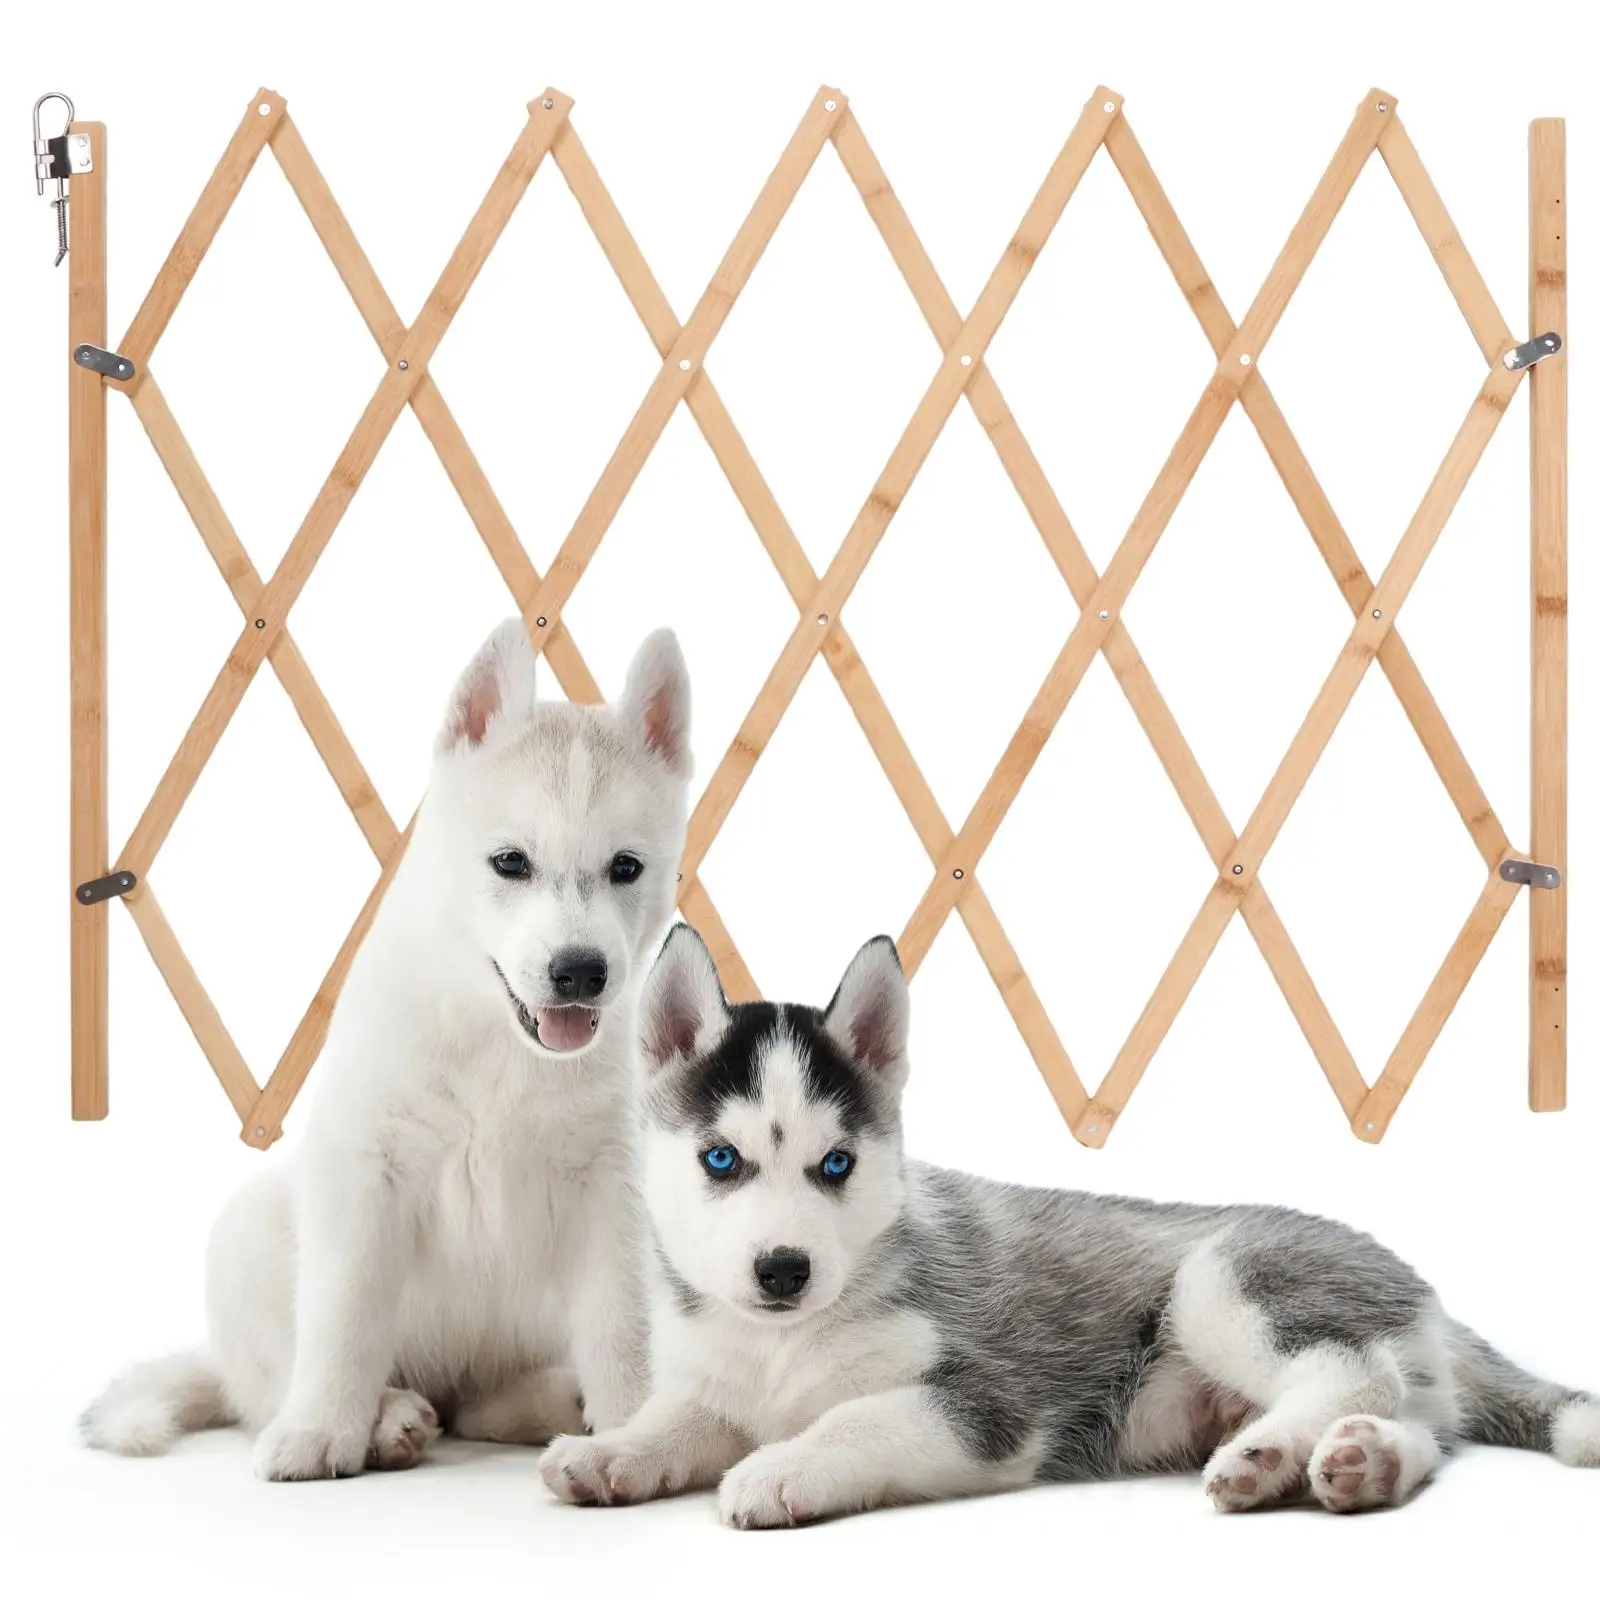 Dog Puppy Folding Fence Folding Room Divider Expandable Accordion Dog Gate for Stairways Outdoor Patio Indoor Small Medium Pet